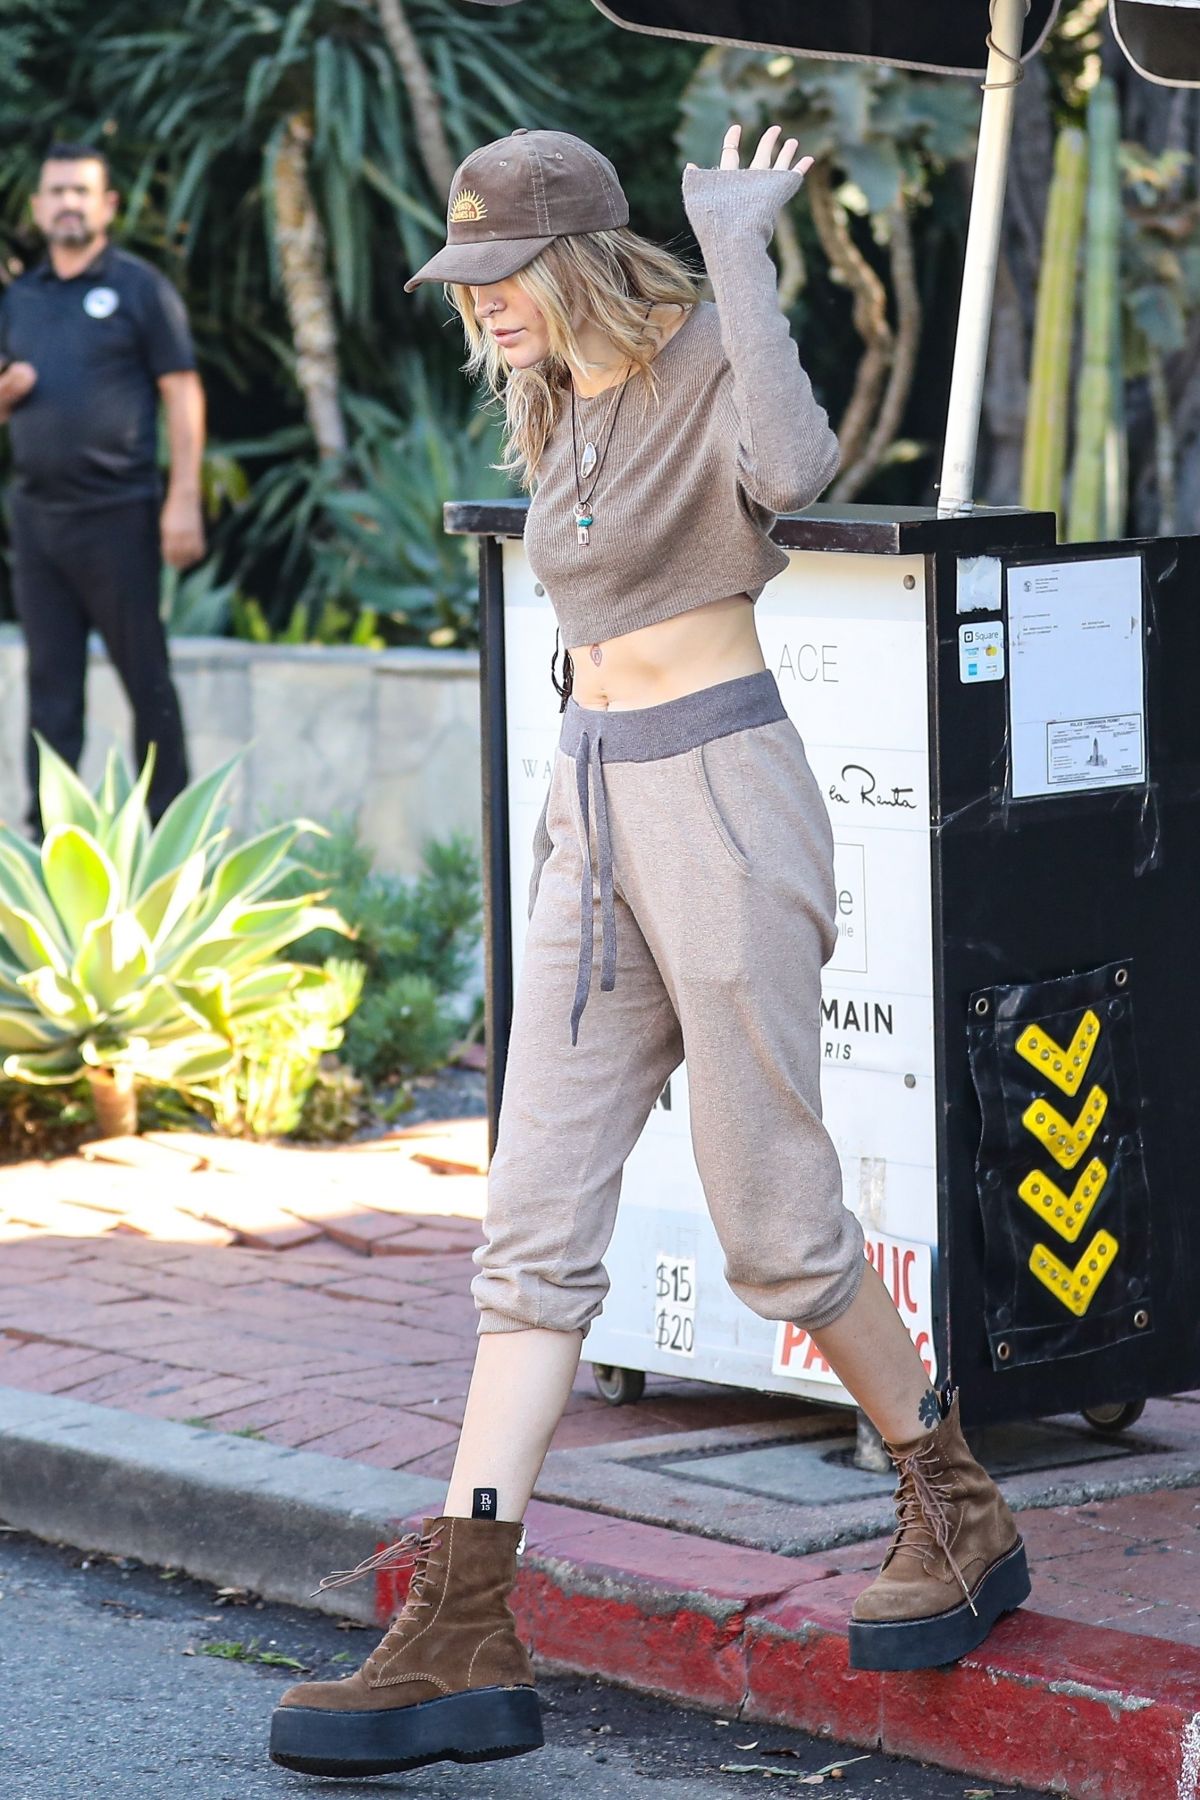 Paris Jackson Casual Shopping Style in Los Angeles 5